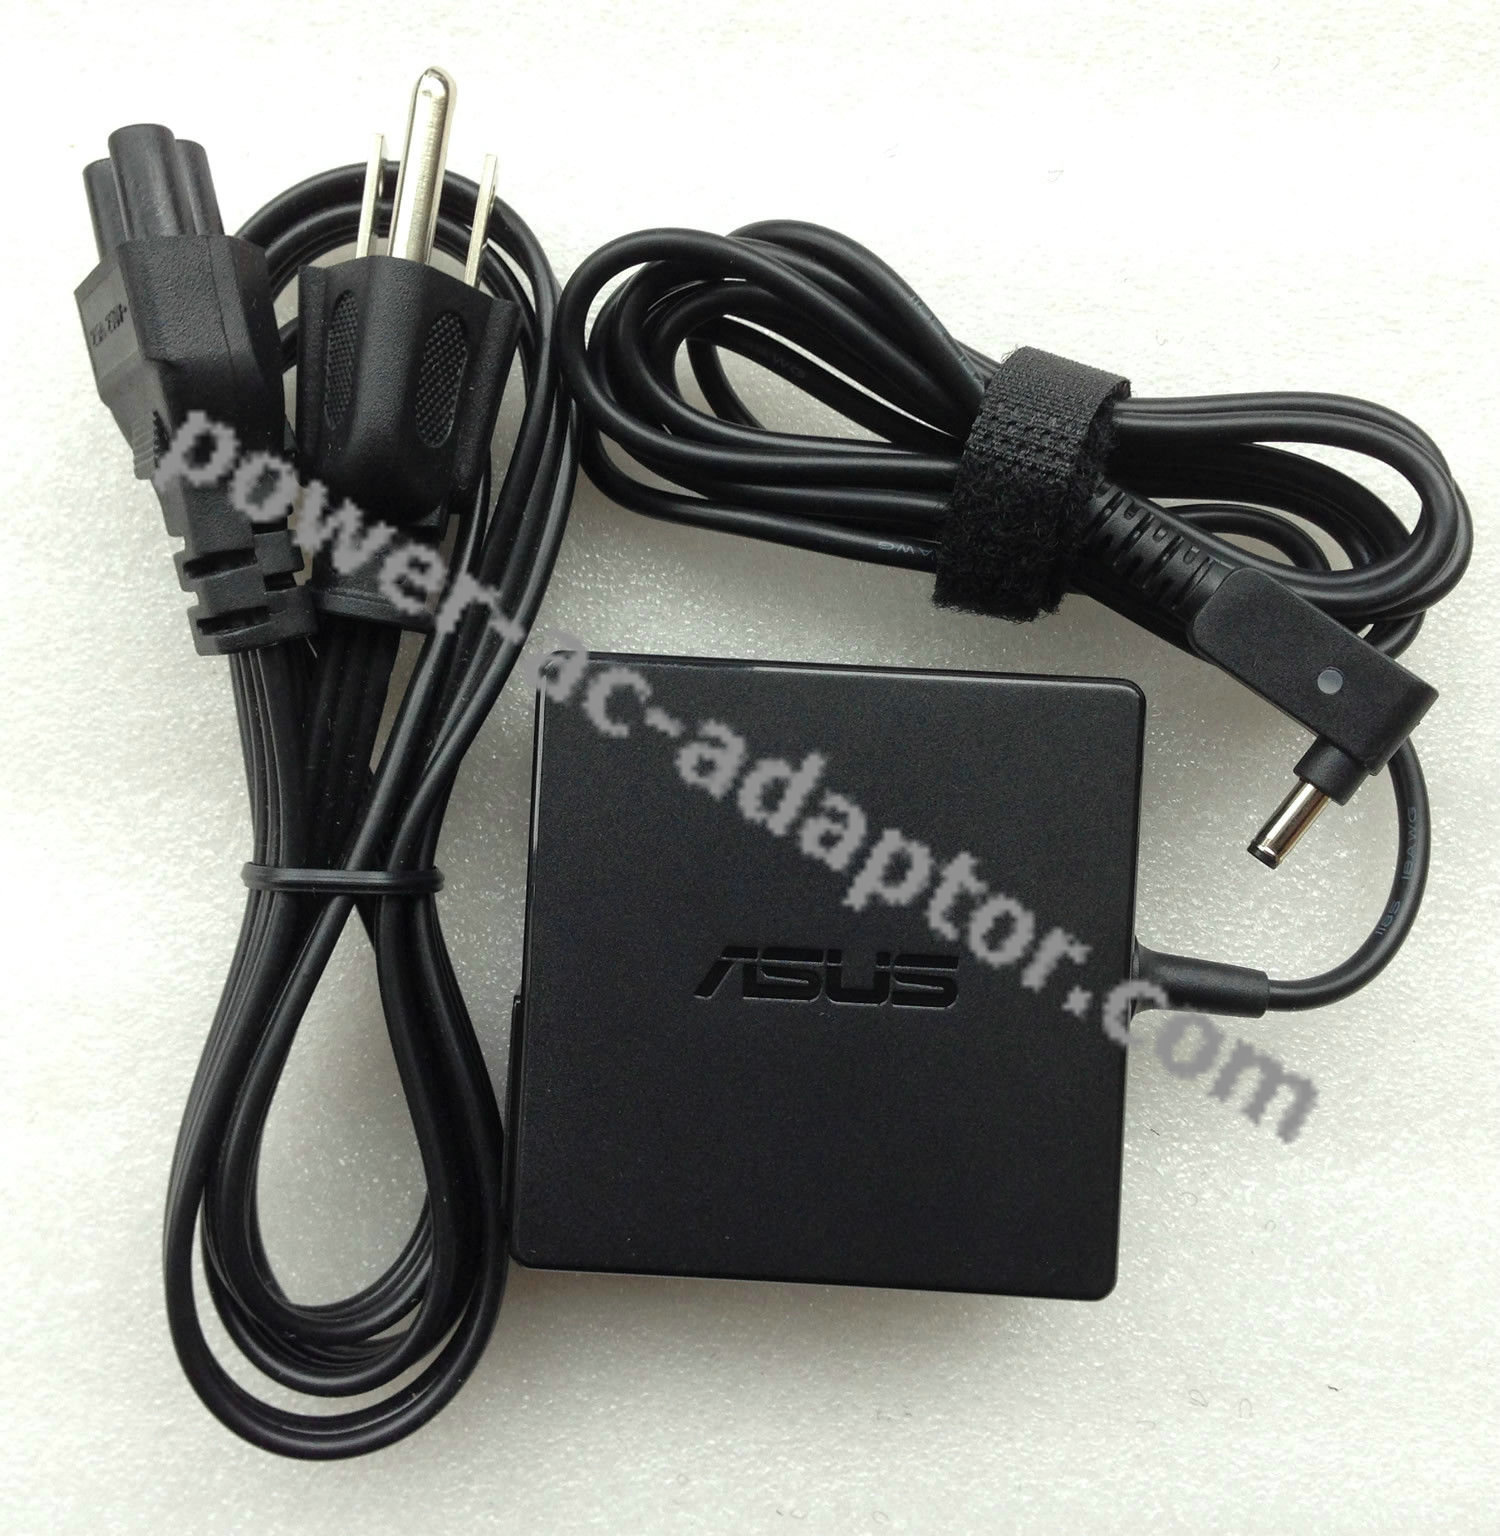 ASUS 65W AC Adapter Charge Zenbook UX302LG-C400P7 Ultrabook